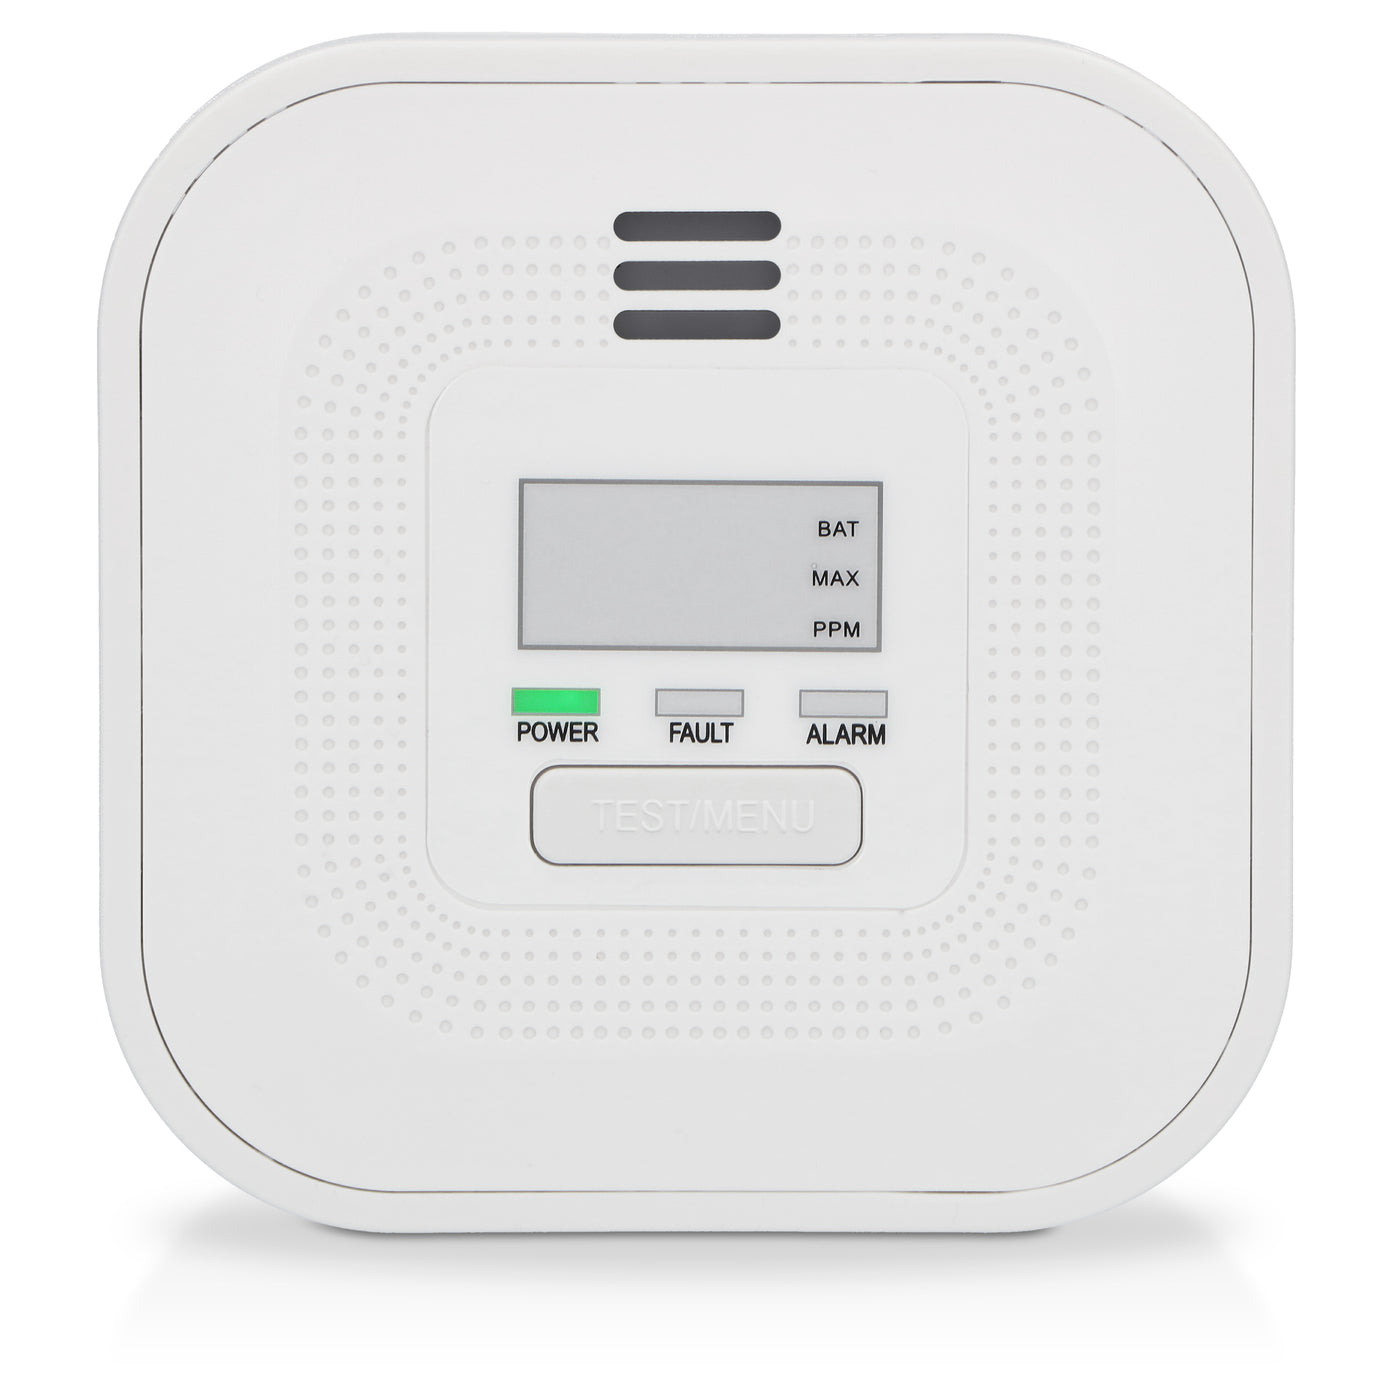 Alecto COA4010 - Carbon monoxide alarm with display and 10 year battery and sensor runtime